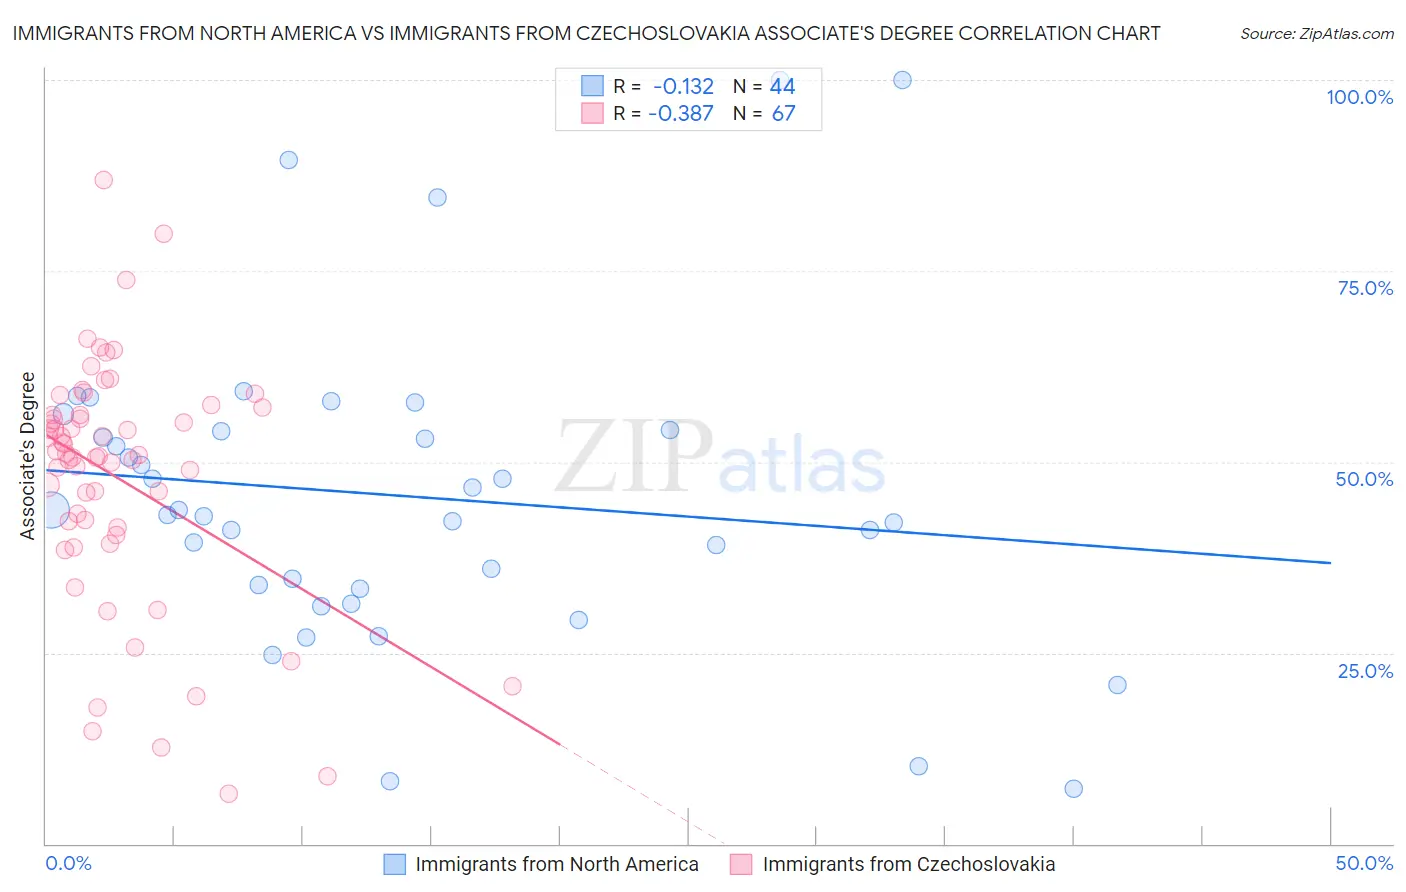 Immigrants from North America vs Immigrants from Czechoslovakia Associate's Degree